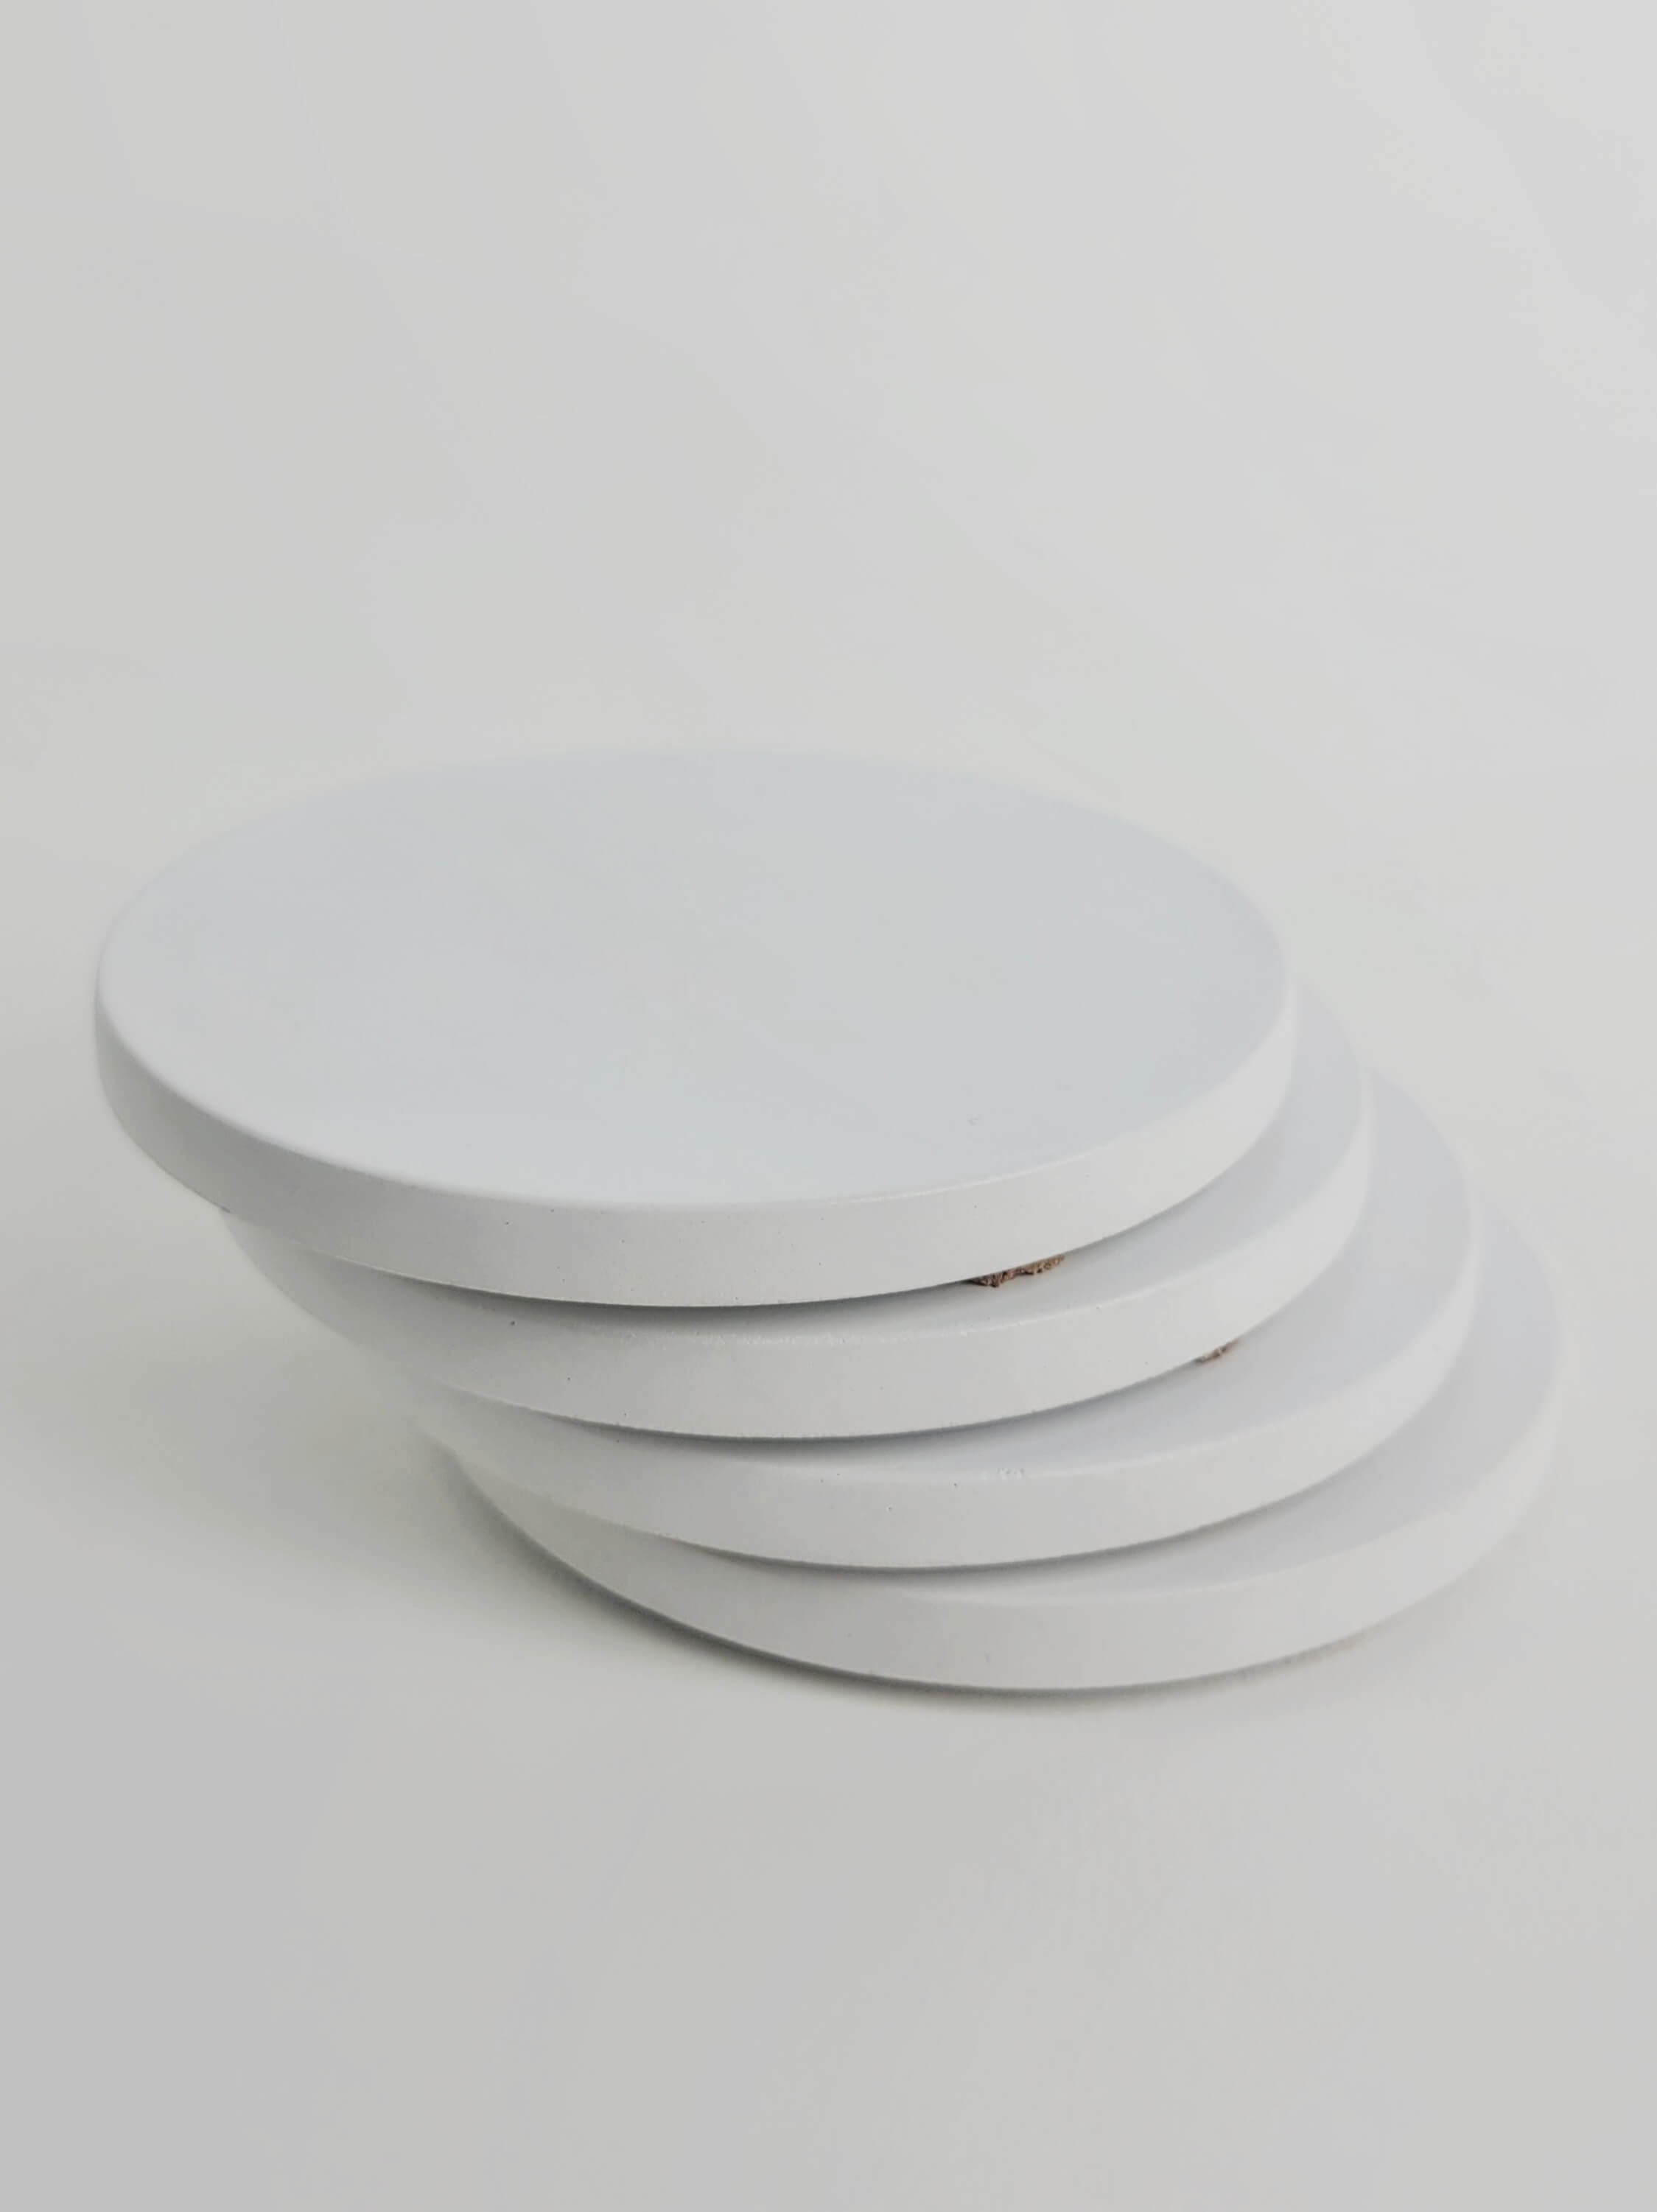 Stack of 4 chalk white concrete coasters, elegantly arranged in a vertical column.